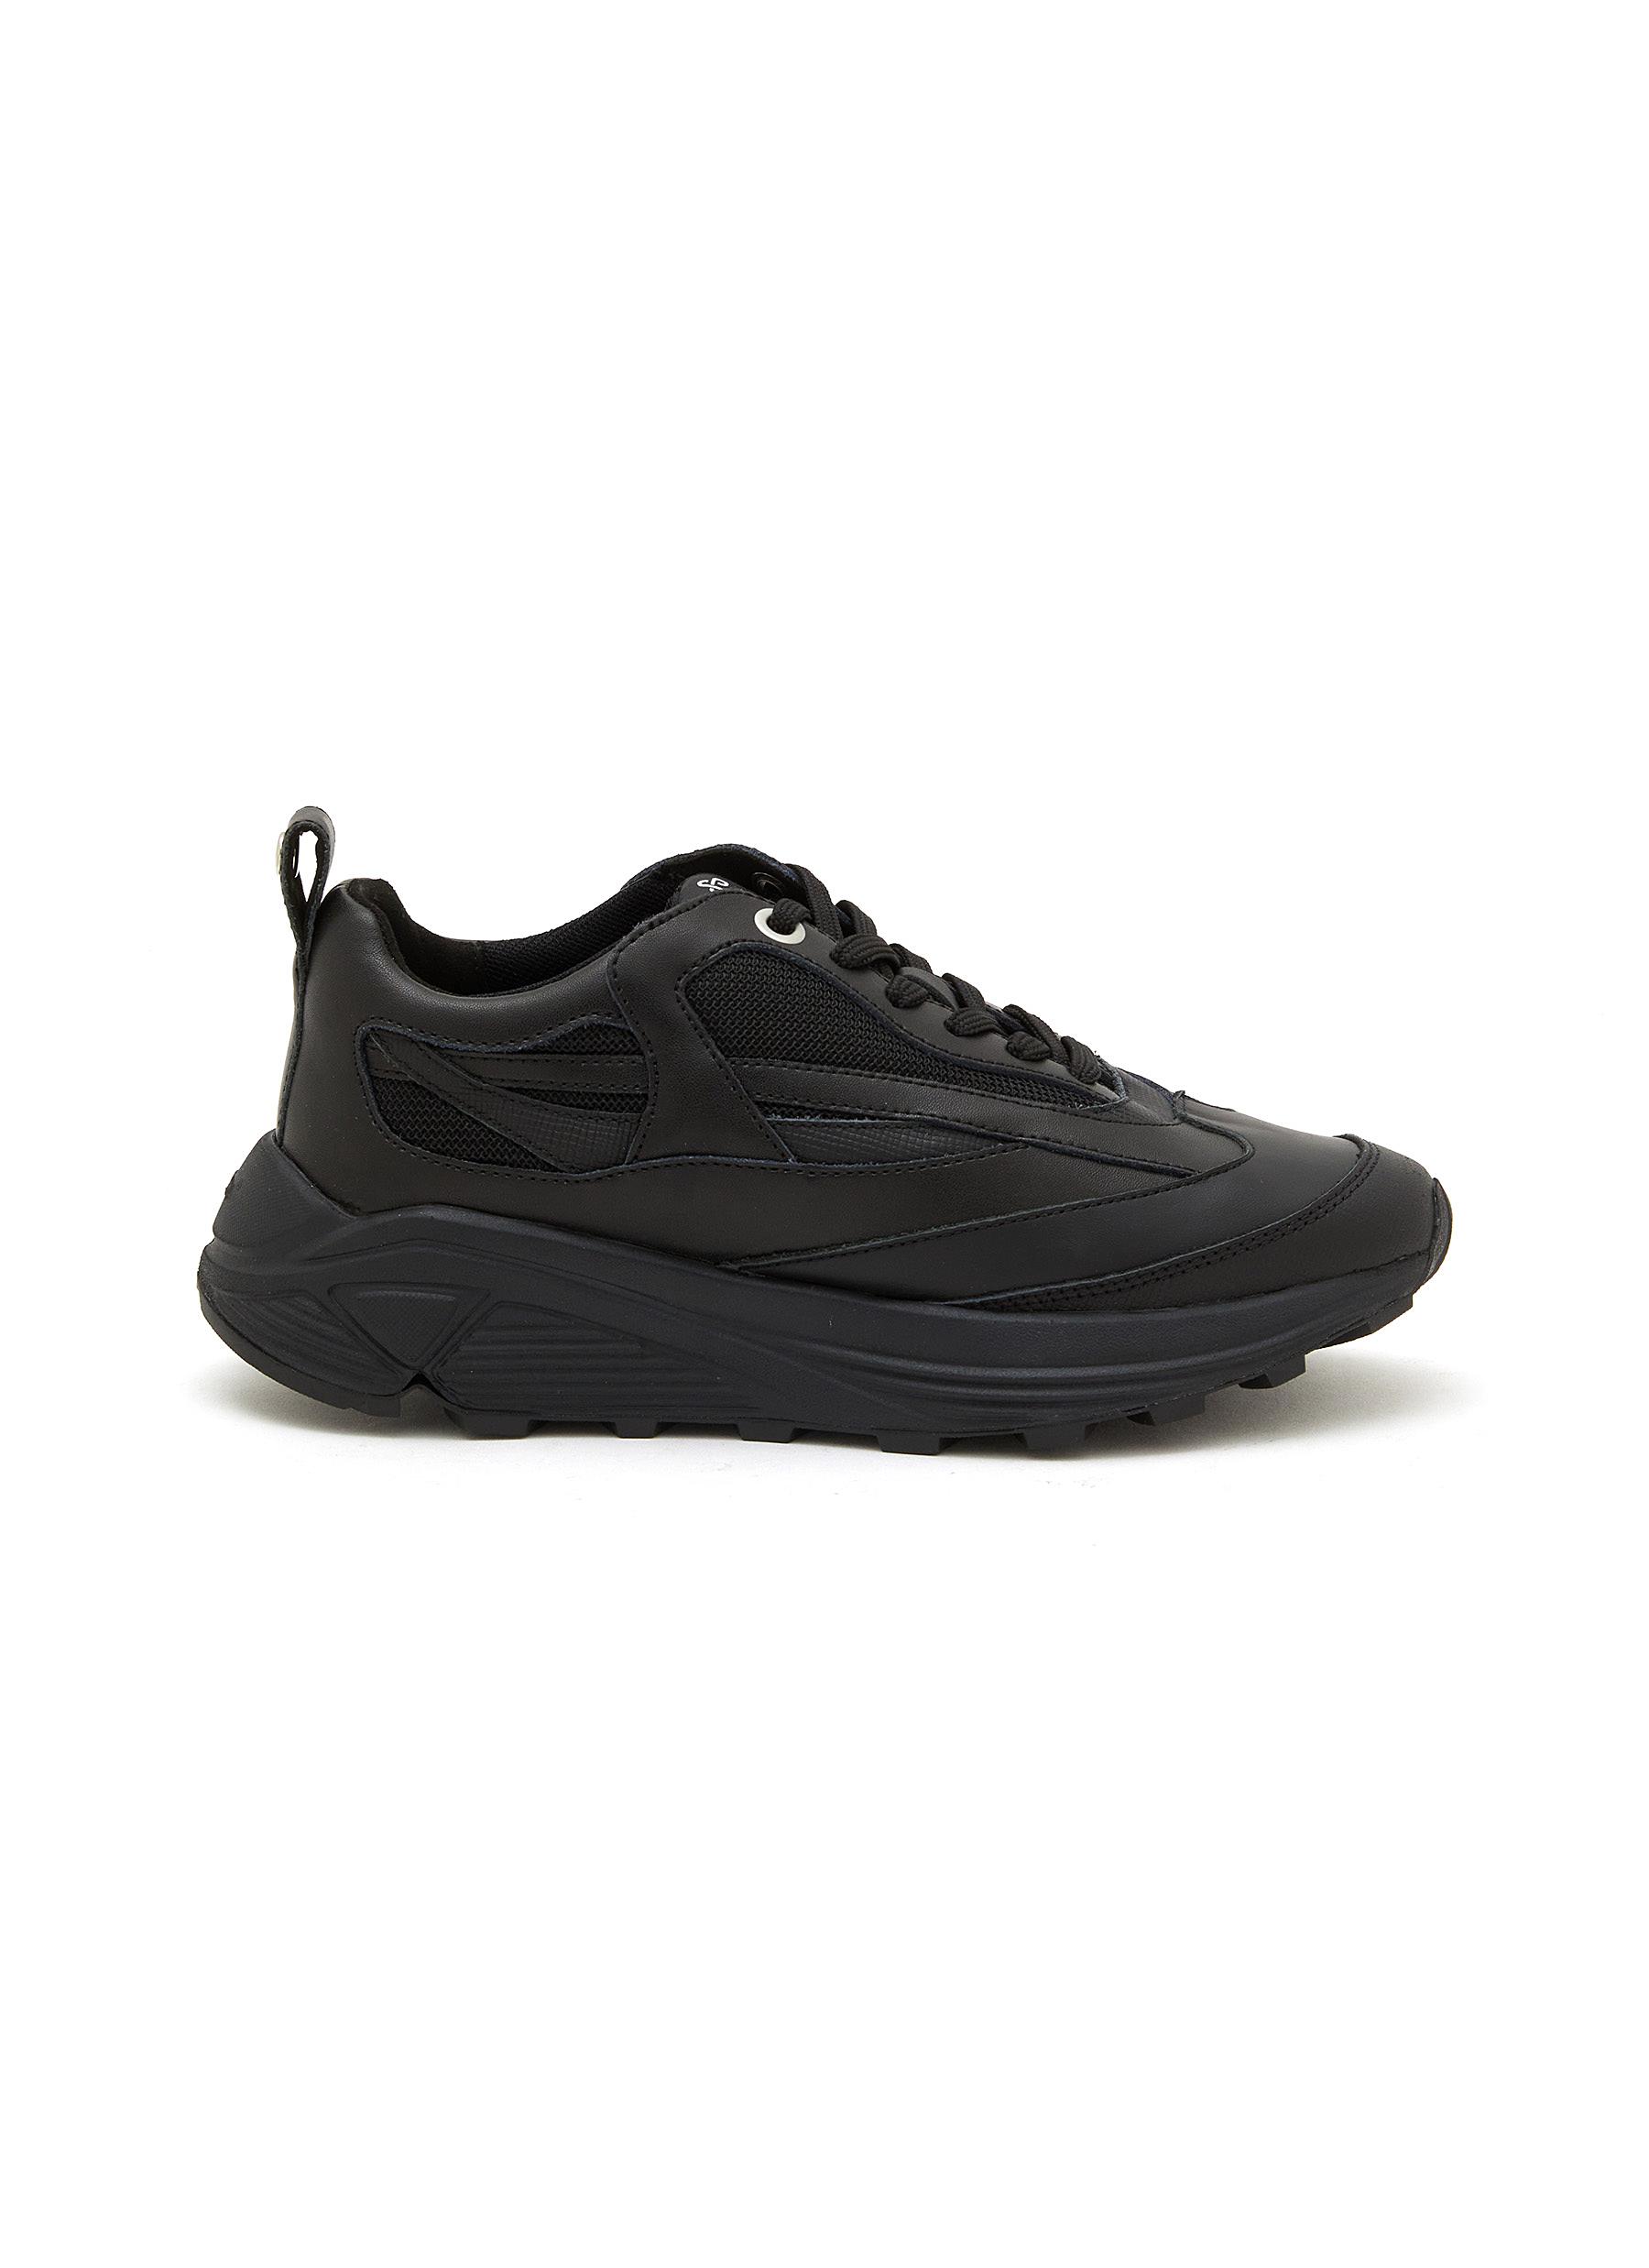 OAO | The Curve 1 Low Top Sneakers | Women | Lane Crawford